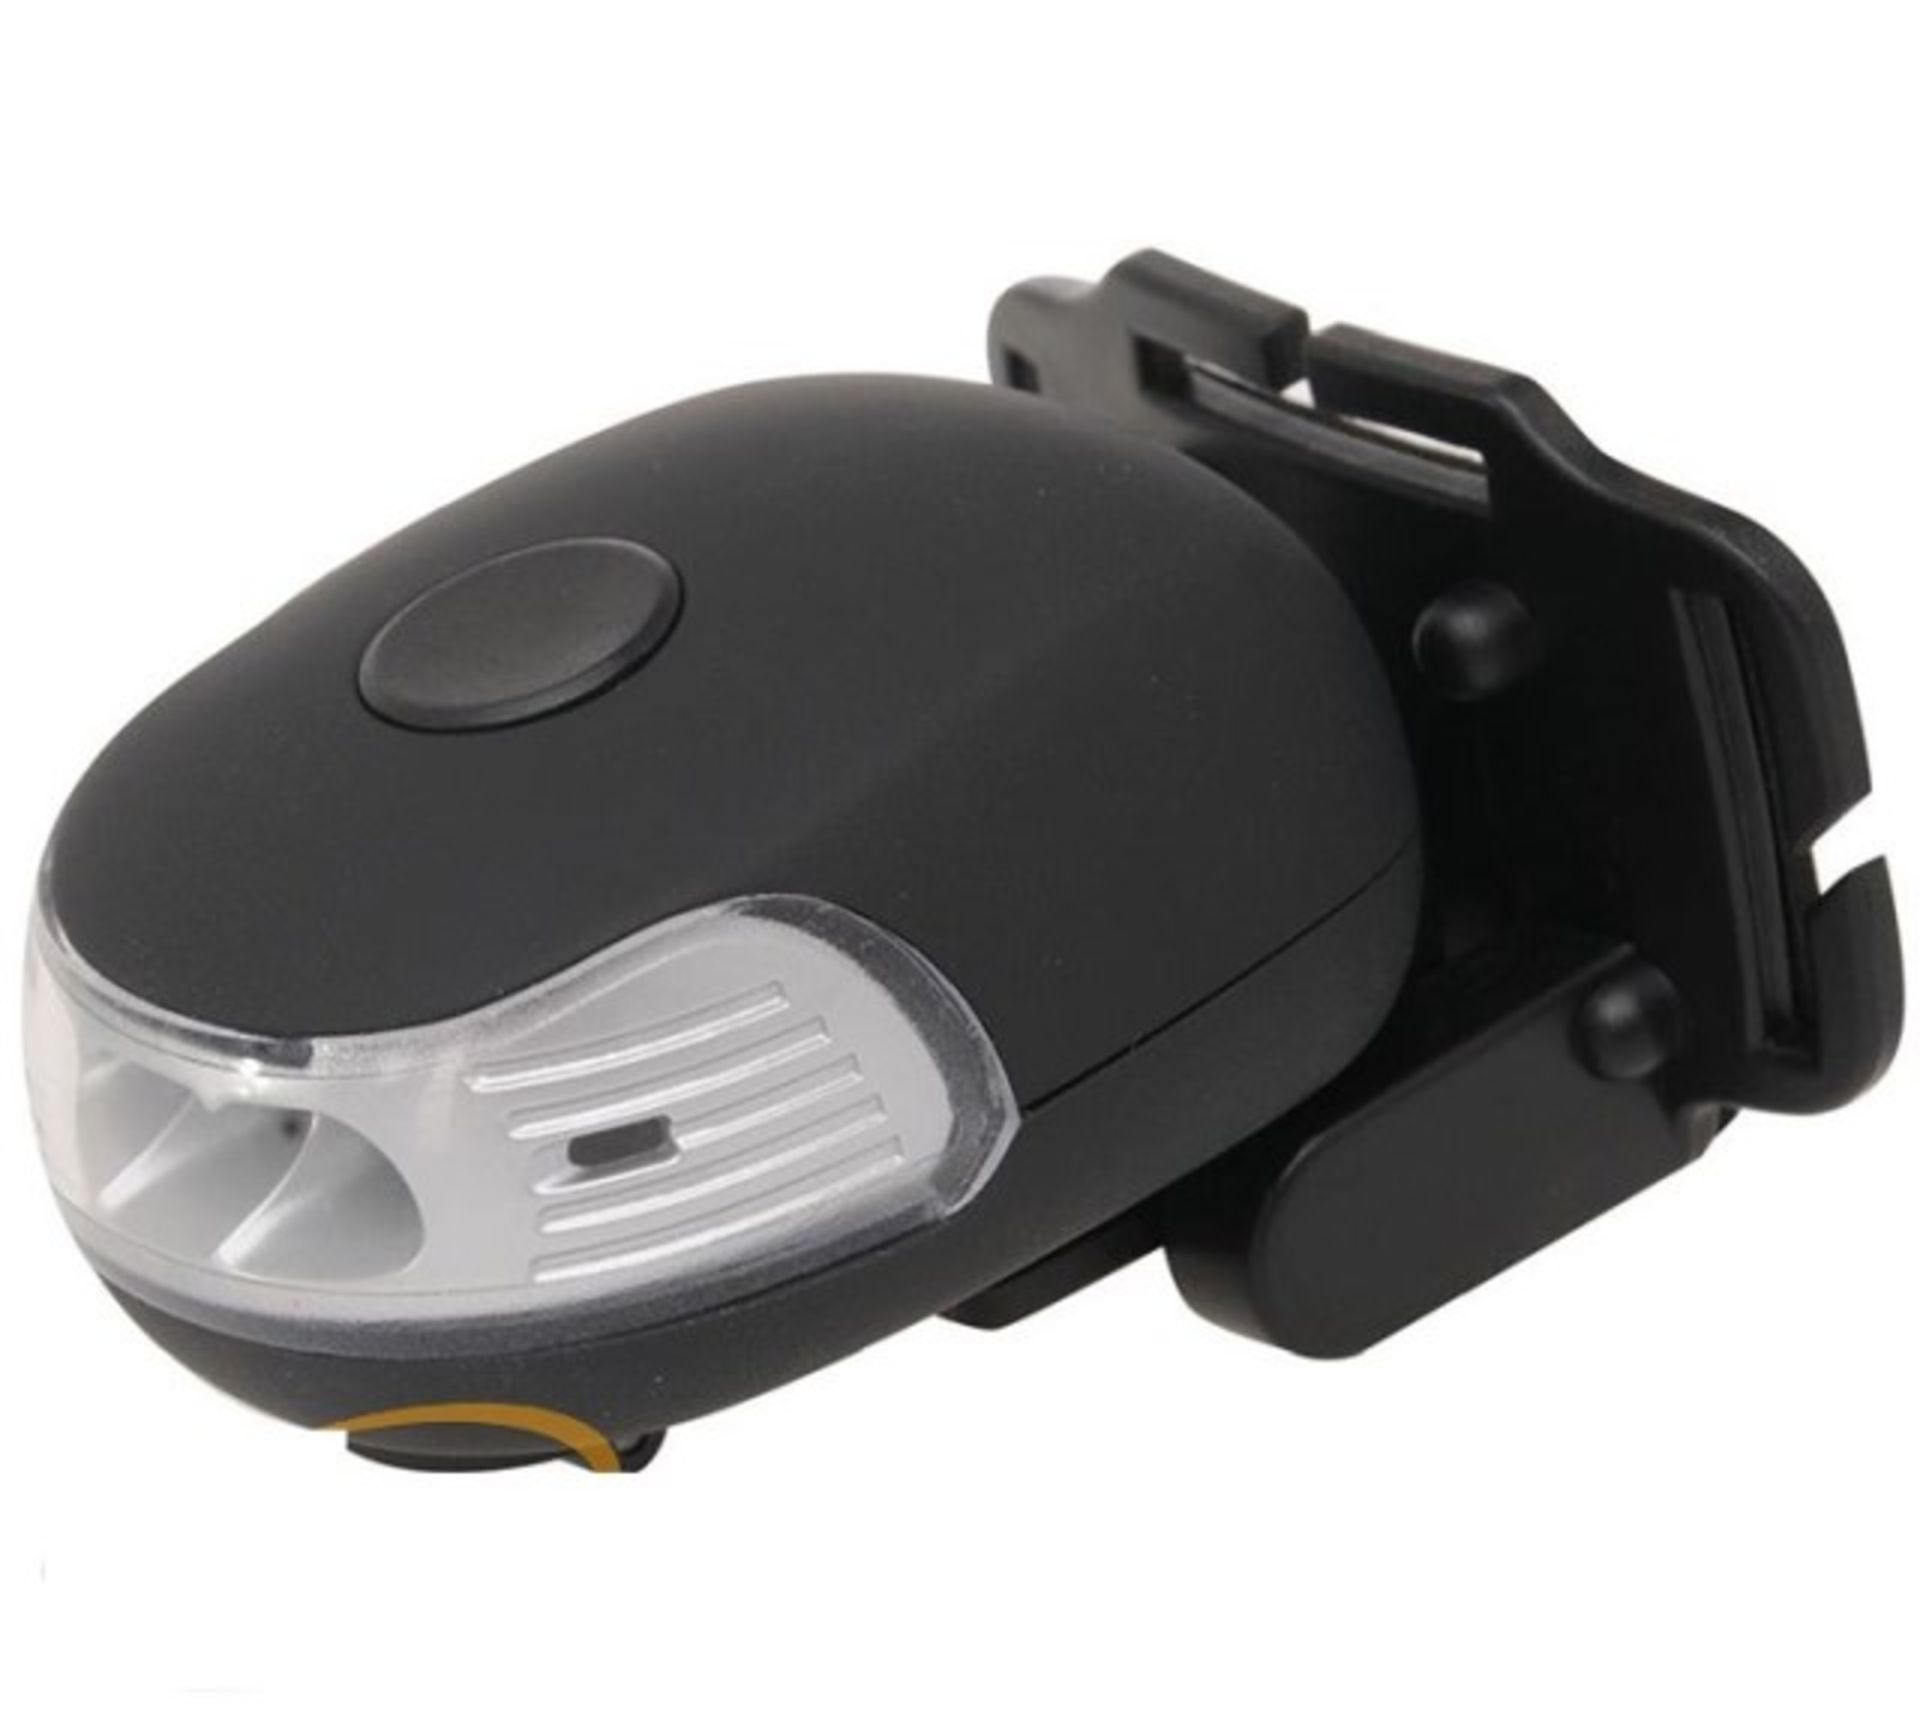 V *TRADE QTY* Brand New Tritronic Optrimax Wind-Up Head Lamp X 8 YOUR BID PRICE TO BE MULTIPLIED